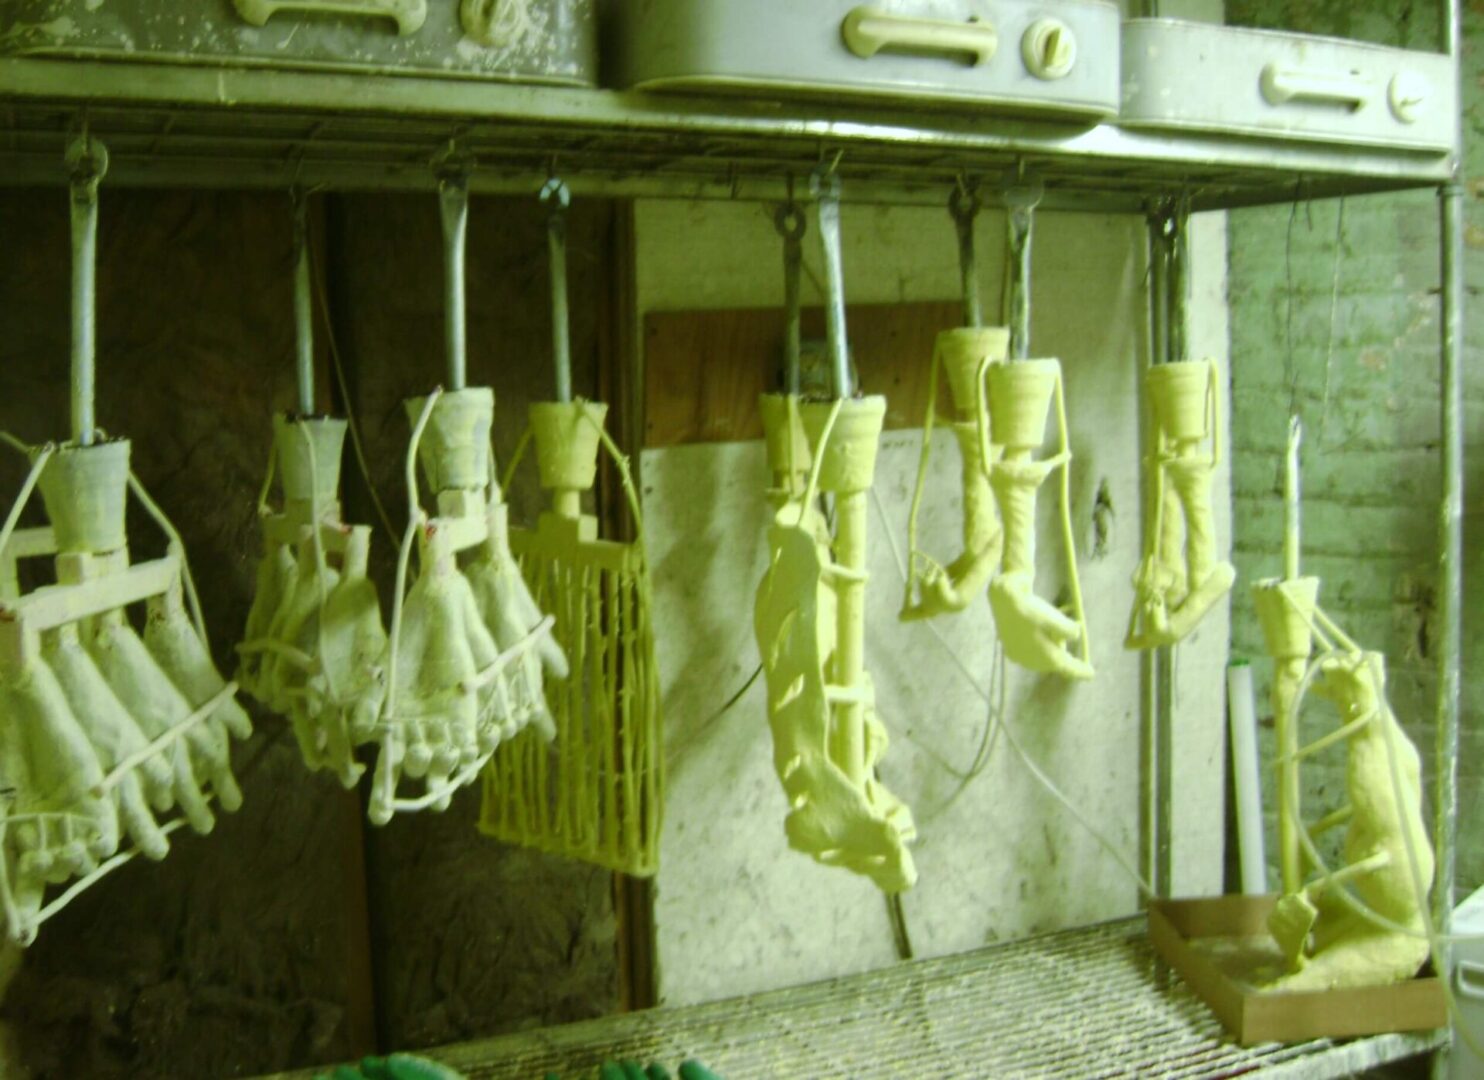 A kitchen with many hanging clothes on the wall